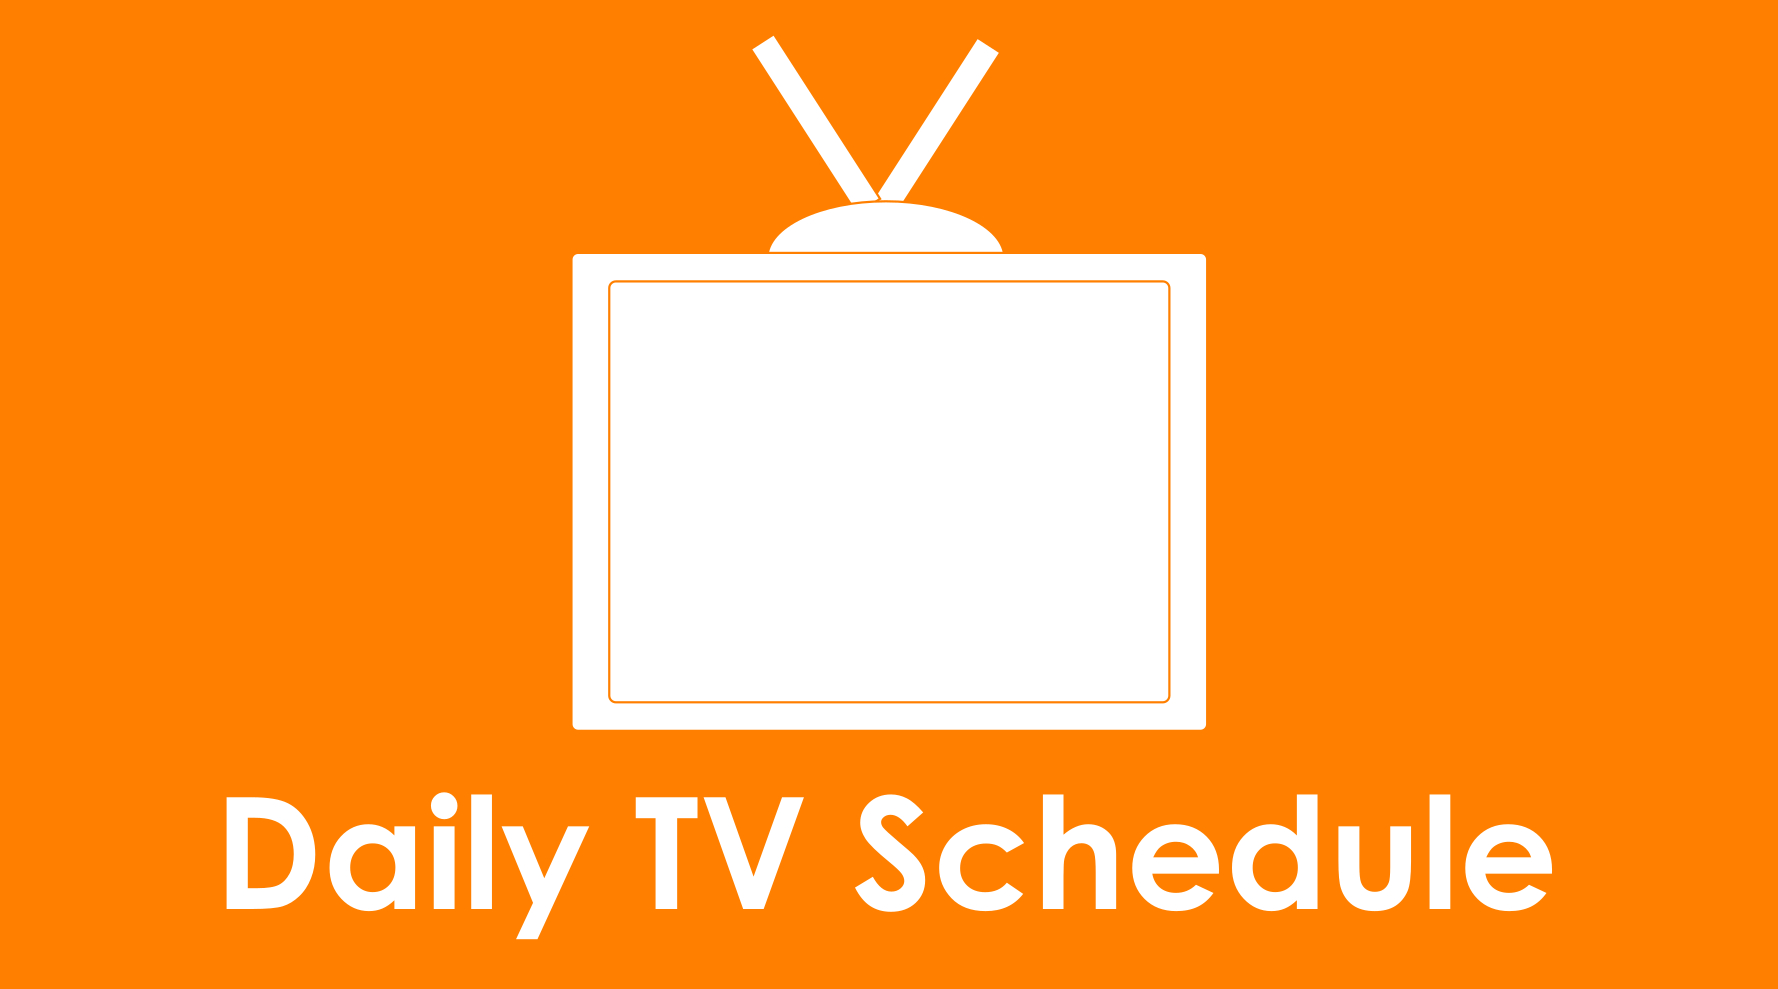 November 13, 2022 TV and Streaming Schedule: The Complete List of New